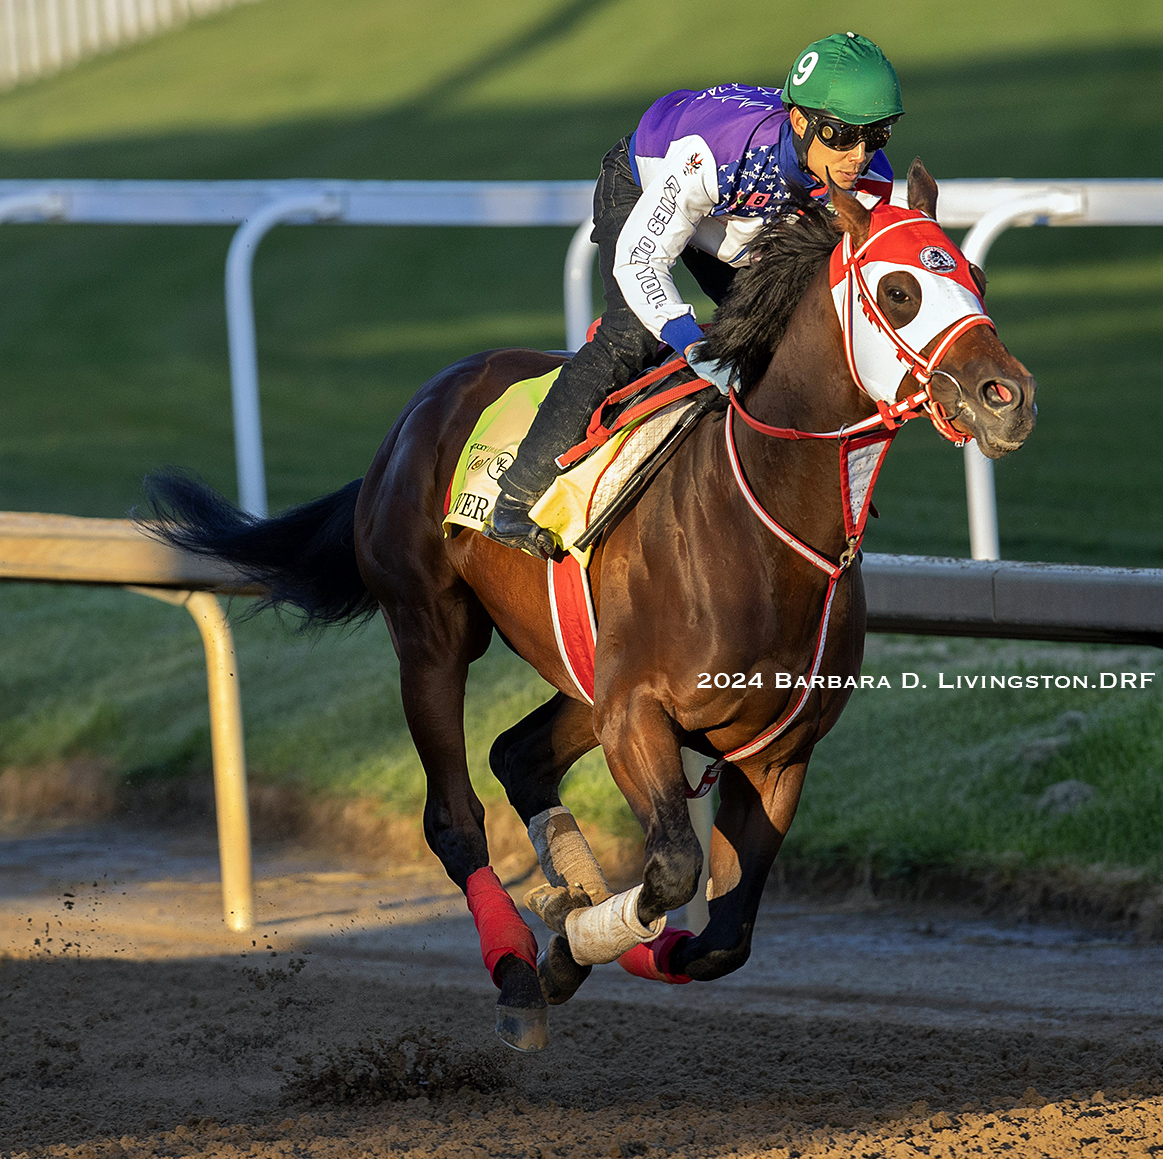 Kentucky Derby contender FOREVER YOUNG (JPN, Real Steel - Forever Darling, by Congrats) most recently won the G2 UAE Derby. The Yoshito Yahagi trainee is undefeated in five starts, including two wins in 2024 (photo, yesterday morning at Churchill Downs).